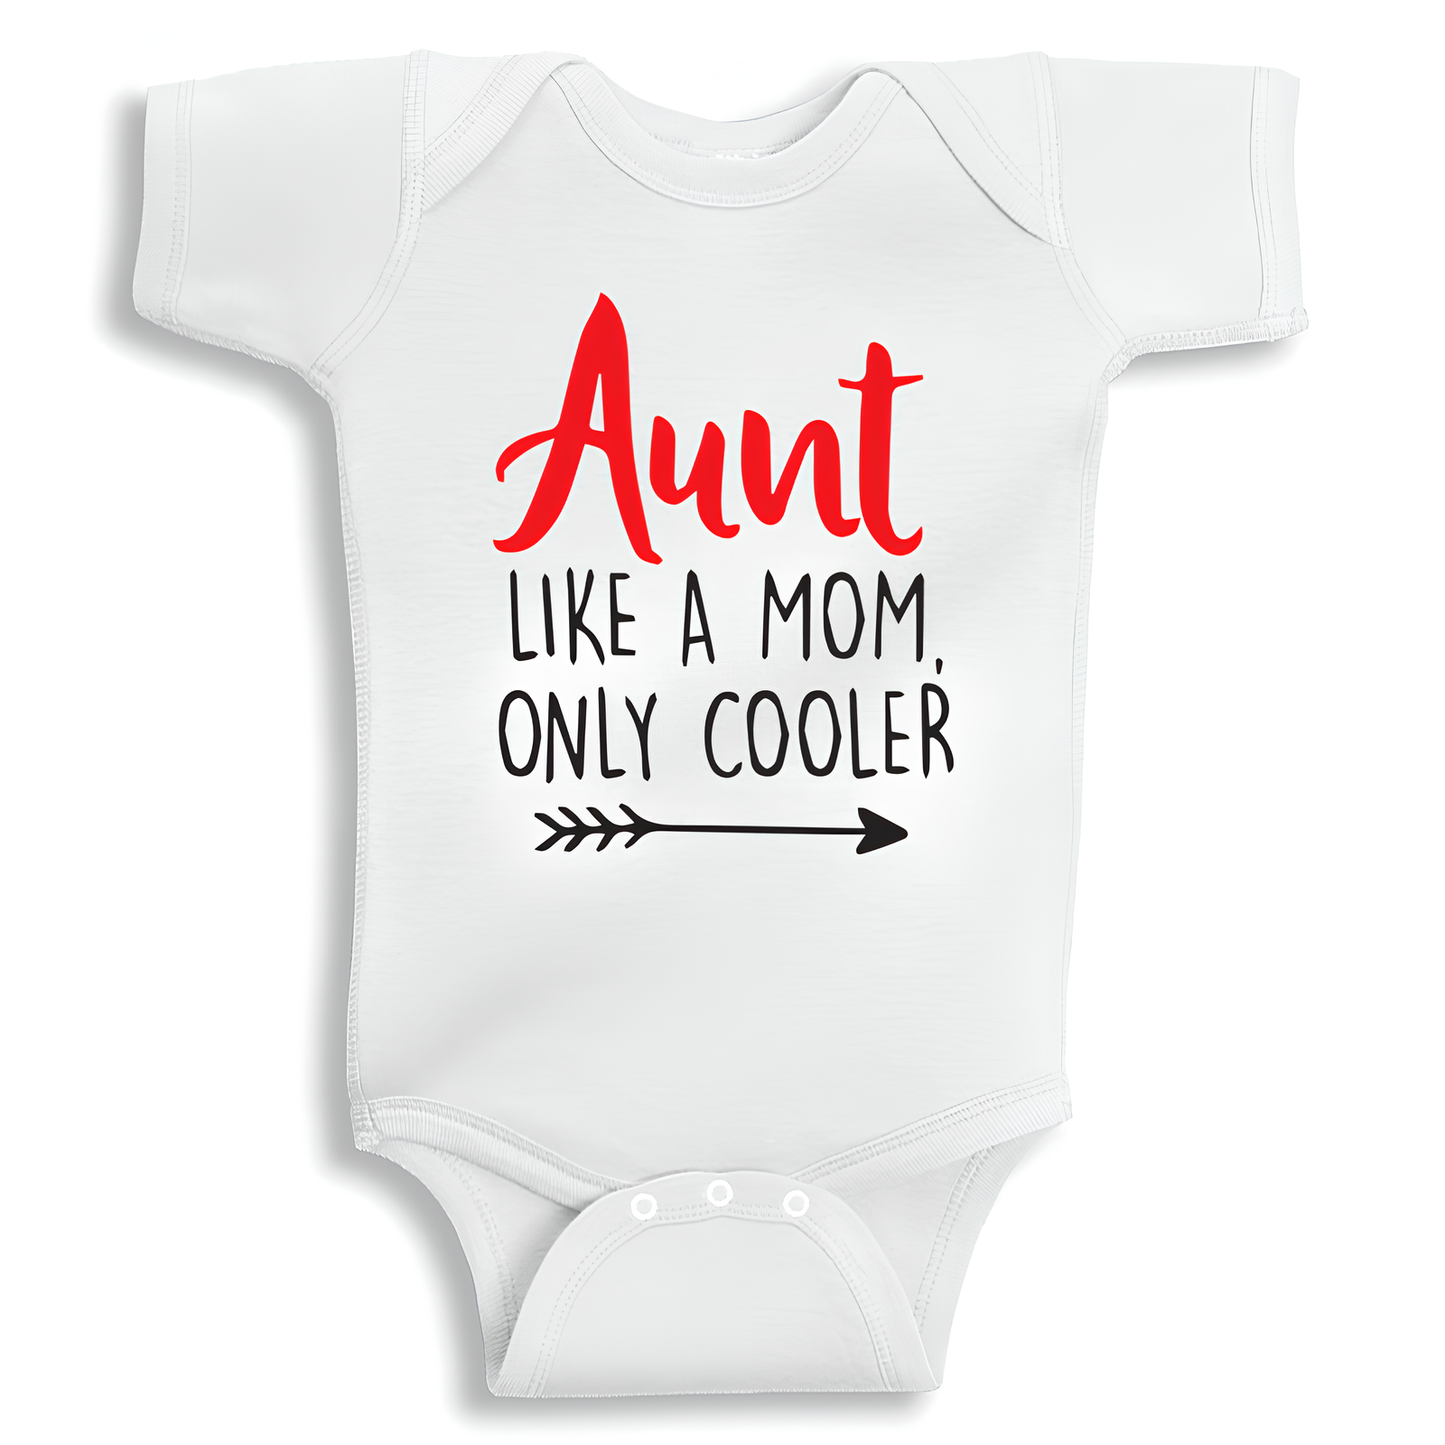 Aunt like a mom Baby Onesie